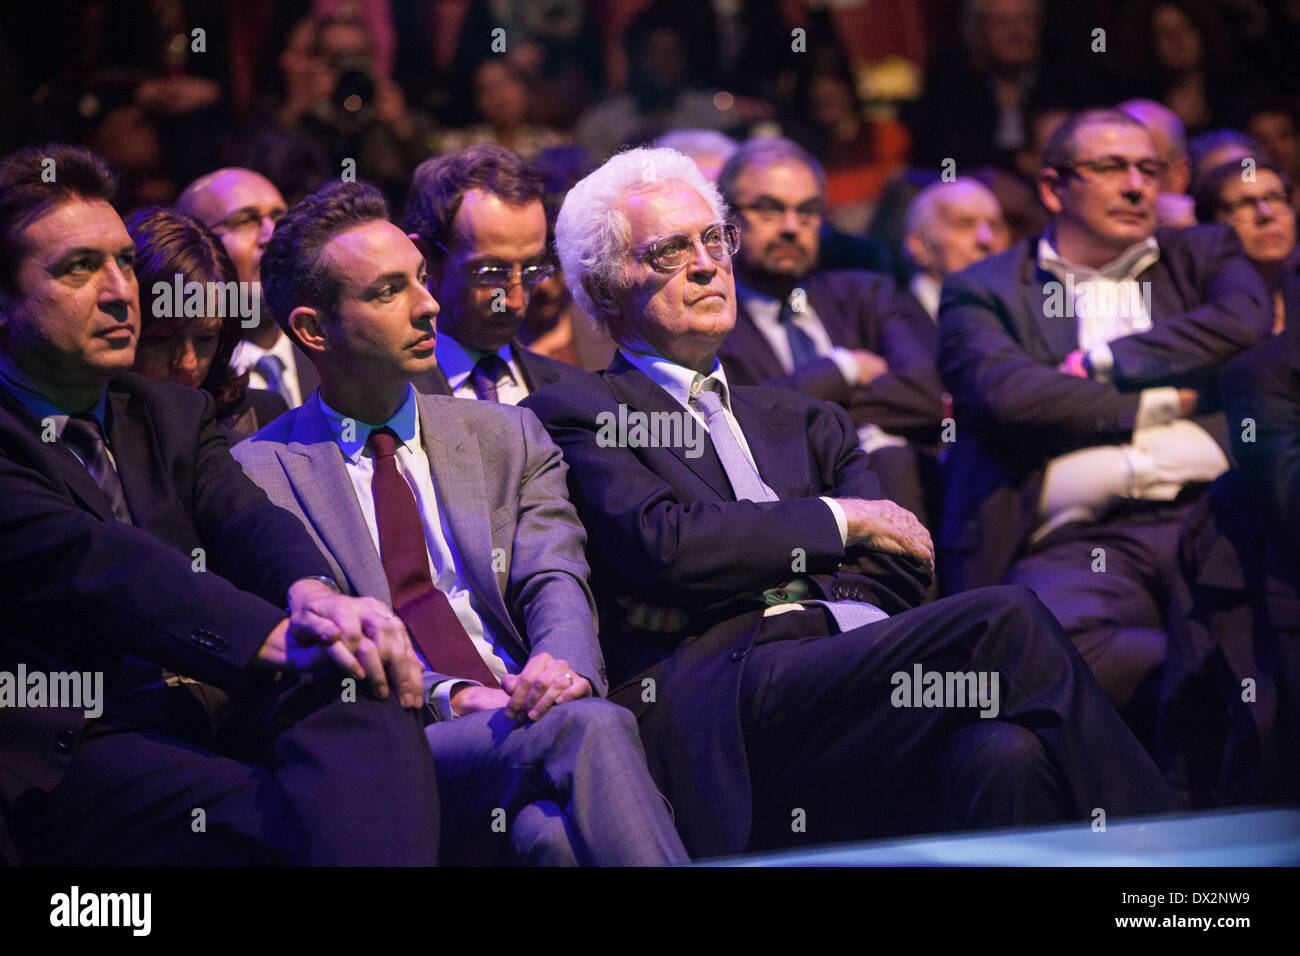 Paris, France. 13th Mar, 2014. Last great meeting Anne Hidalgo winter circus in the presence of heads of lists each district and personalities as Christine Bravo, Lionel Jospin, Bertrand Delano√É¬´, the mayor of Rome ignazio marino and the Mayor of Dakar Khalifa Ababacar Sall. © Michael Bunel/NurPhoto/ZUMAPRESS.com/Alamy Live News Stock Photo